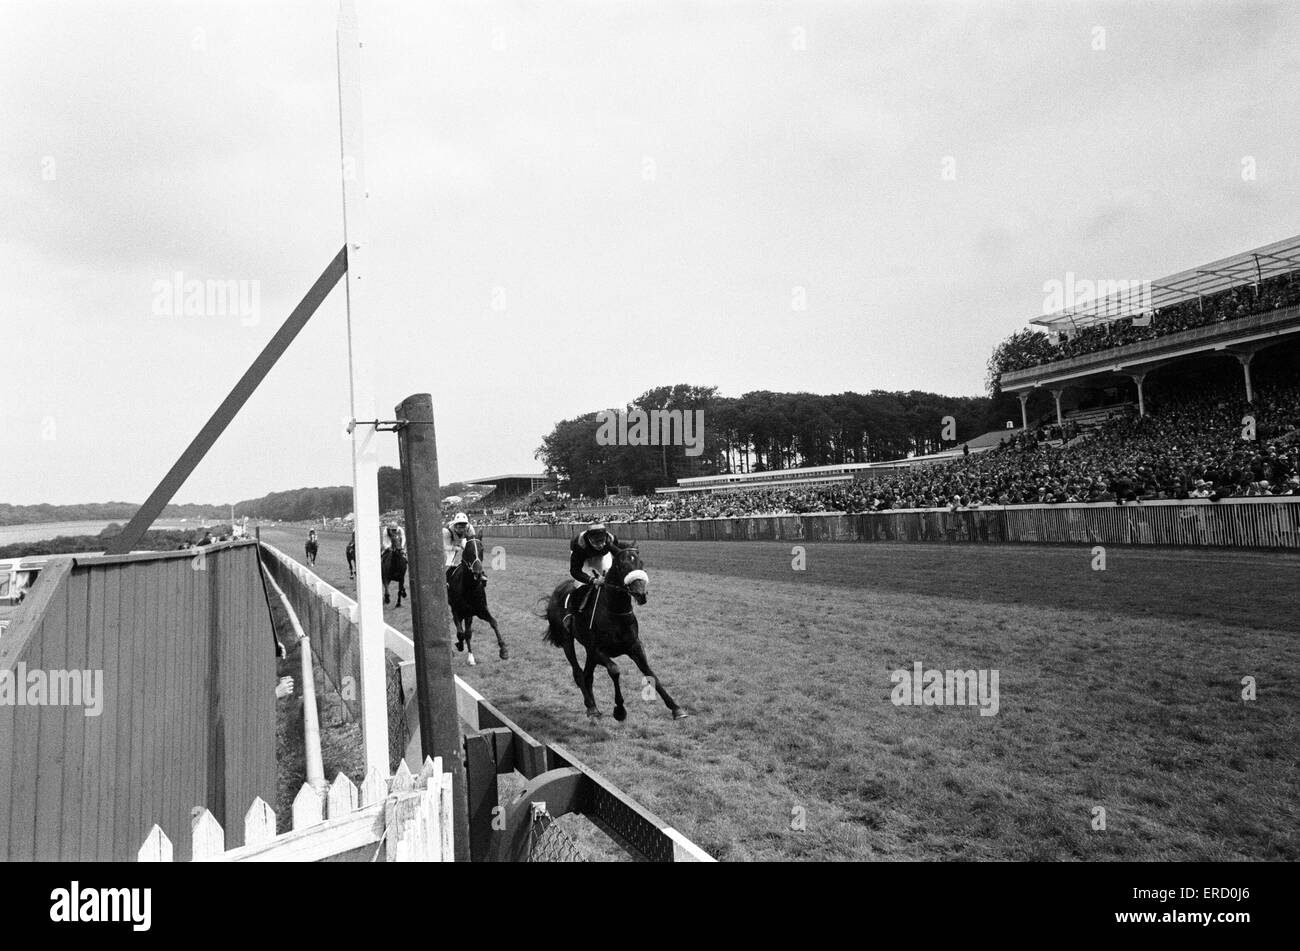 Racing Scenes during Glorious Goodwood. 2nd August 1968. Stock Photo